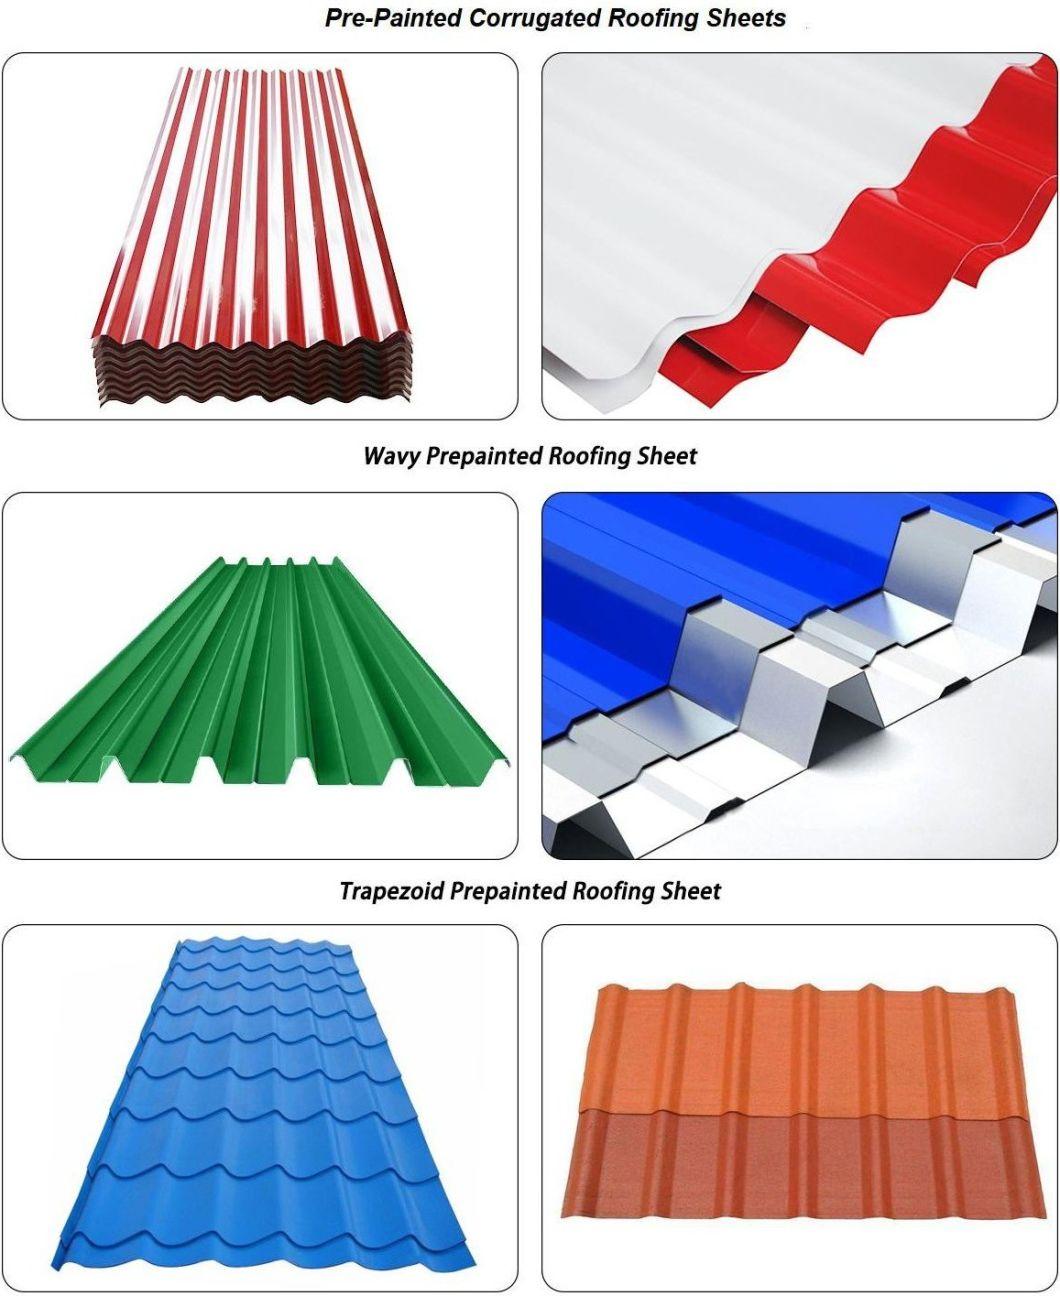 Manufacture JIS AISI 0.12-2.0mm*600-1250mm Tiles Roof Steel Building Material Corrugated Roofing Sheet